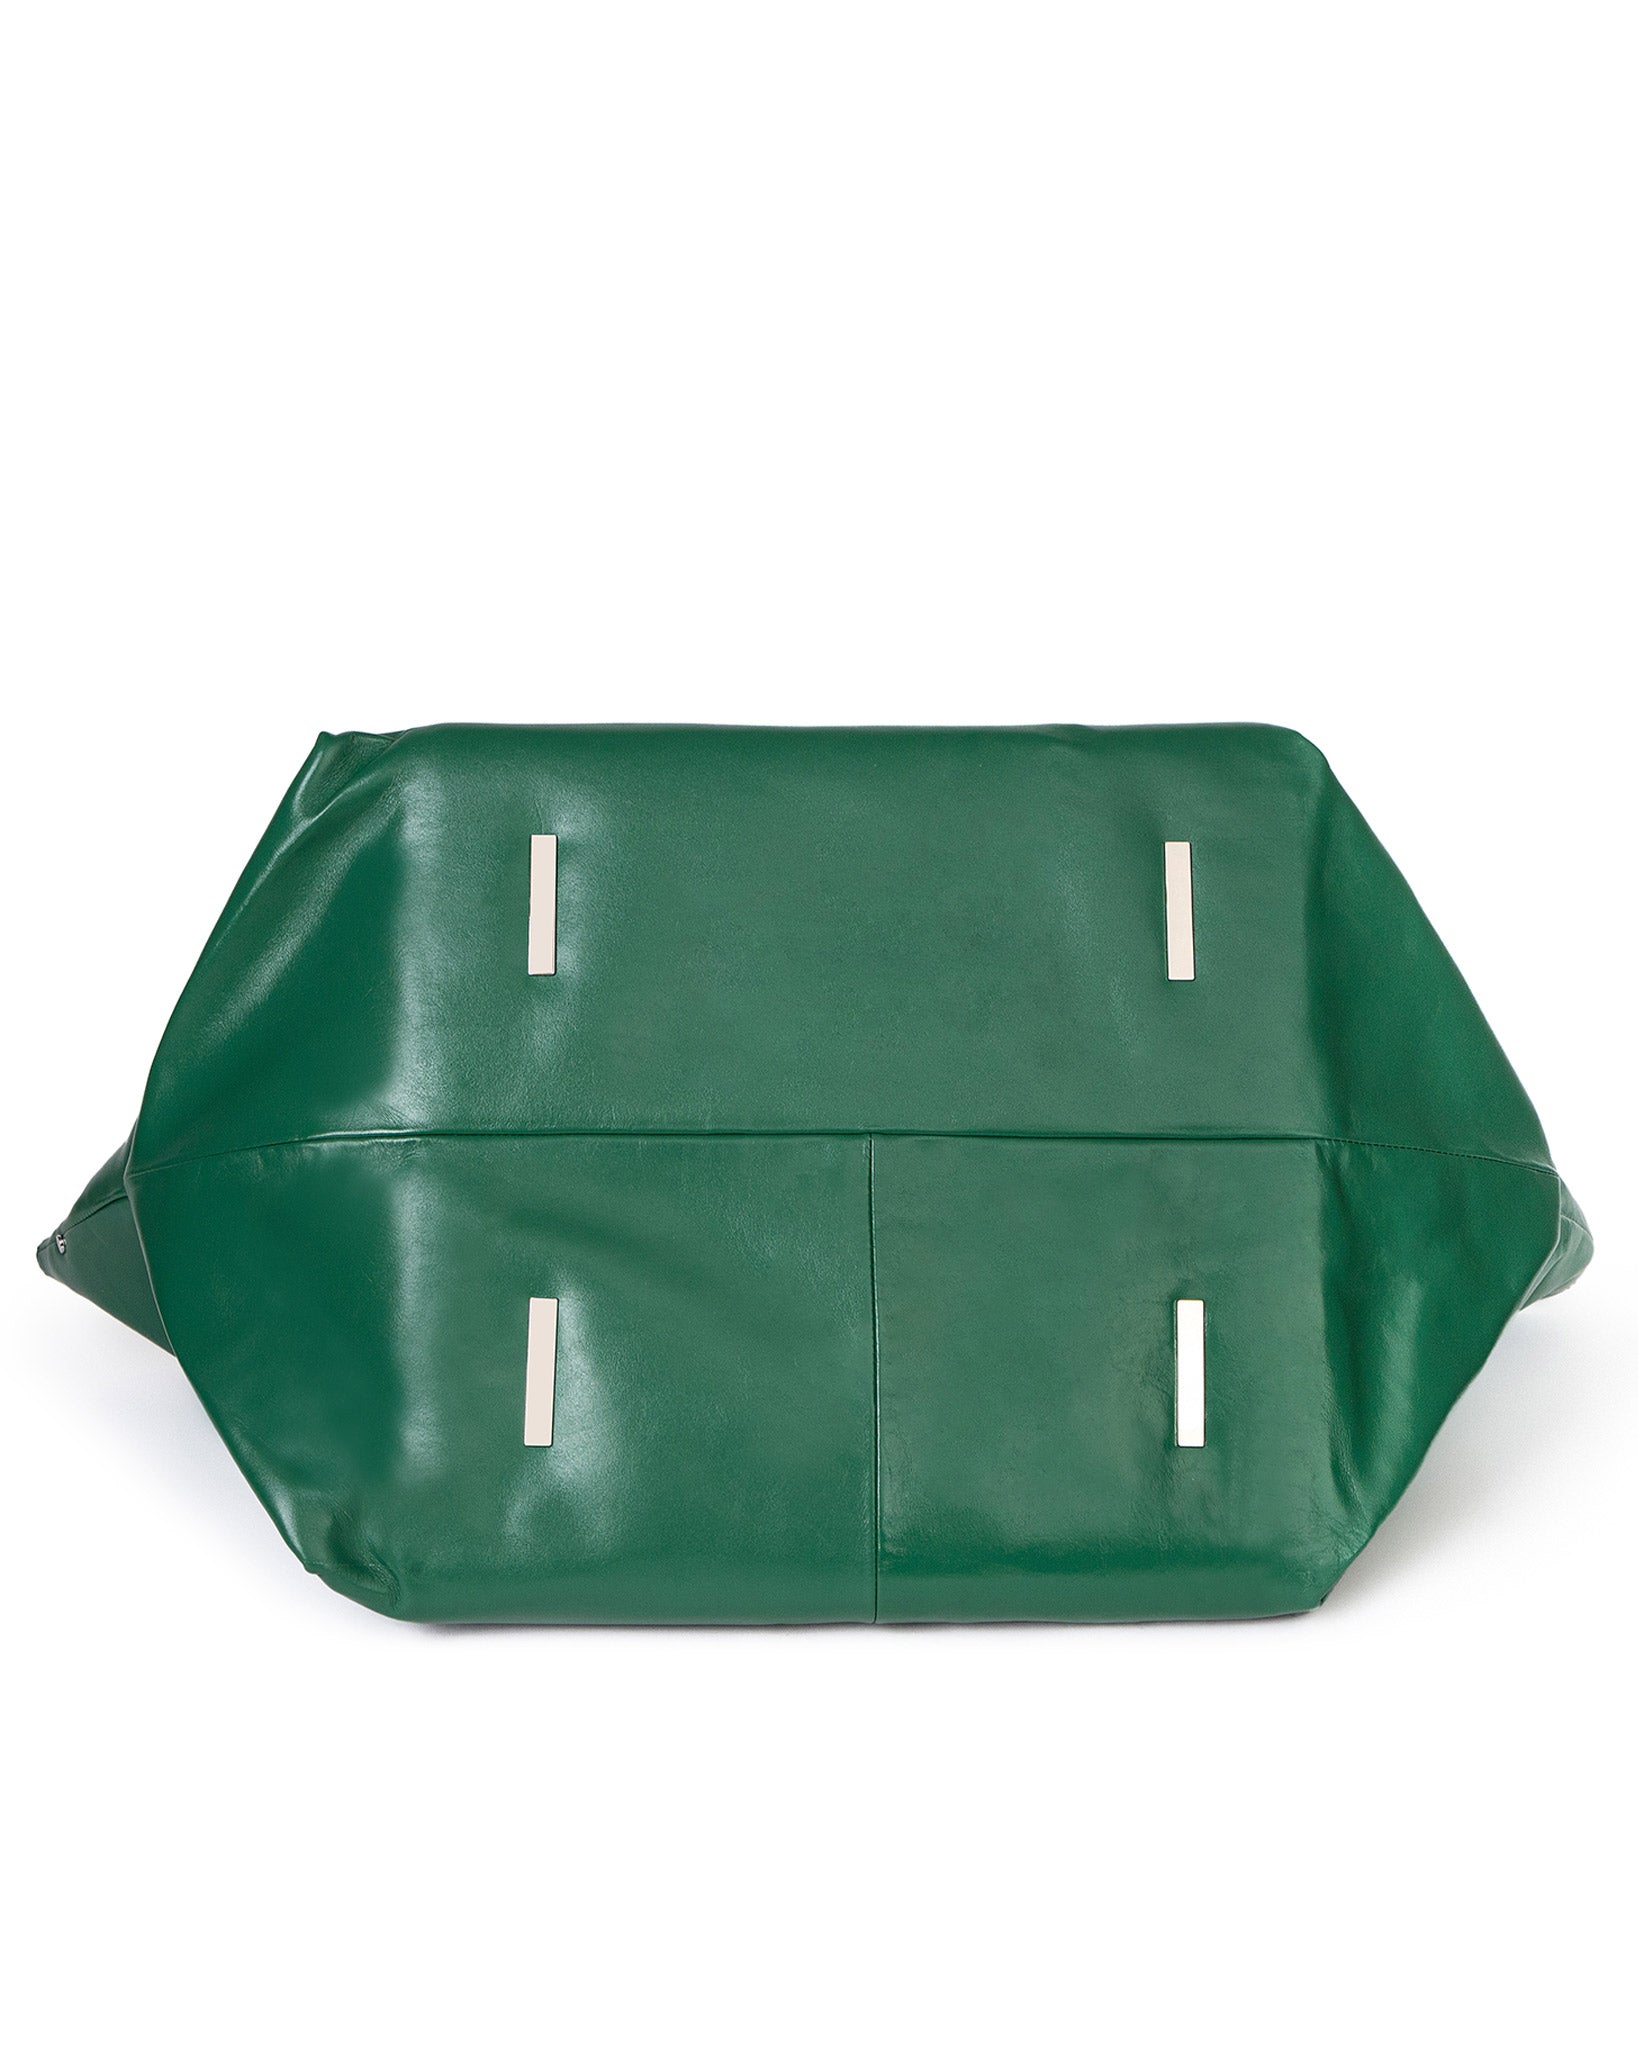 Brandon Blackwood New York - Everyday Tote - Forest Green Leather